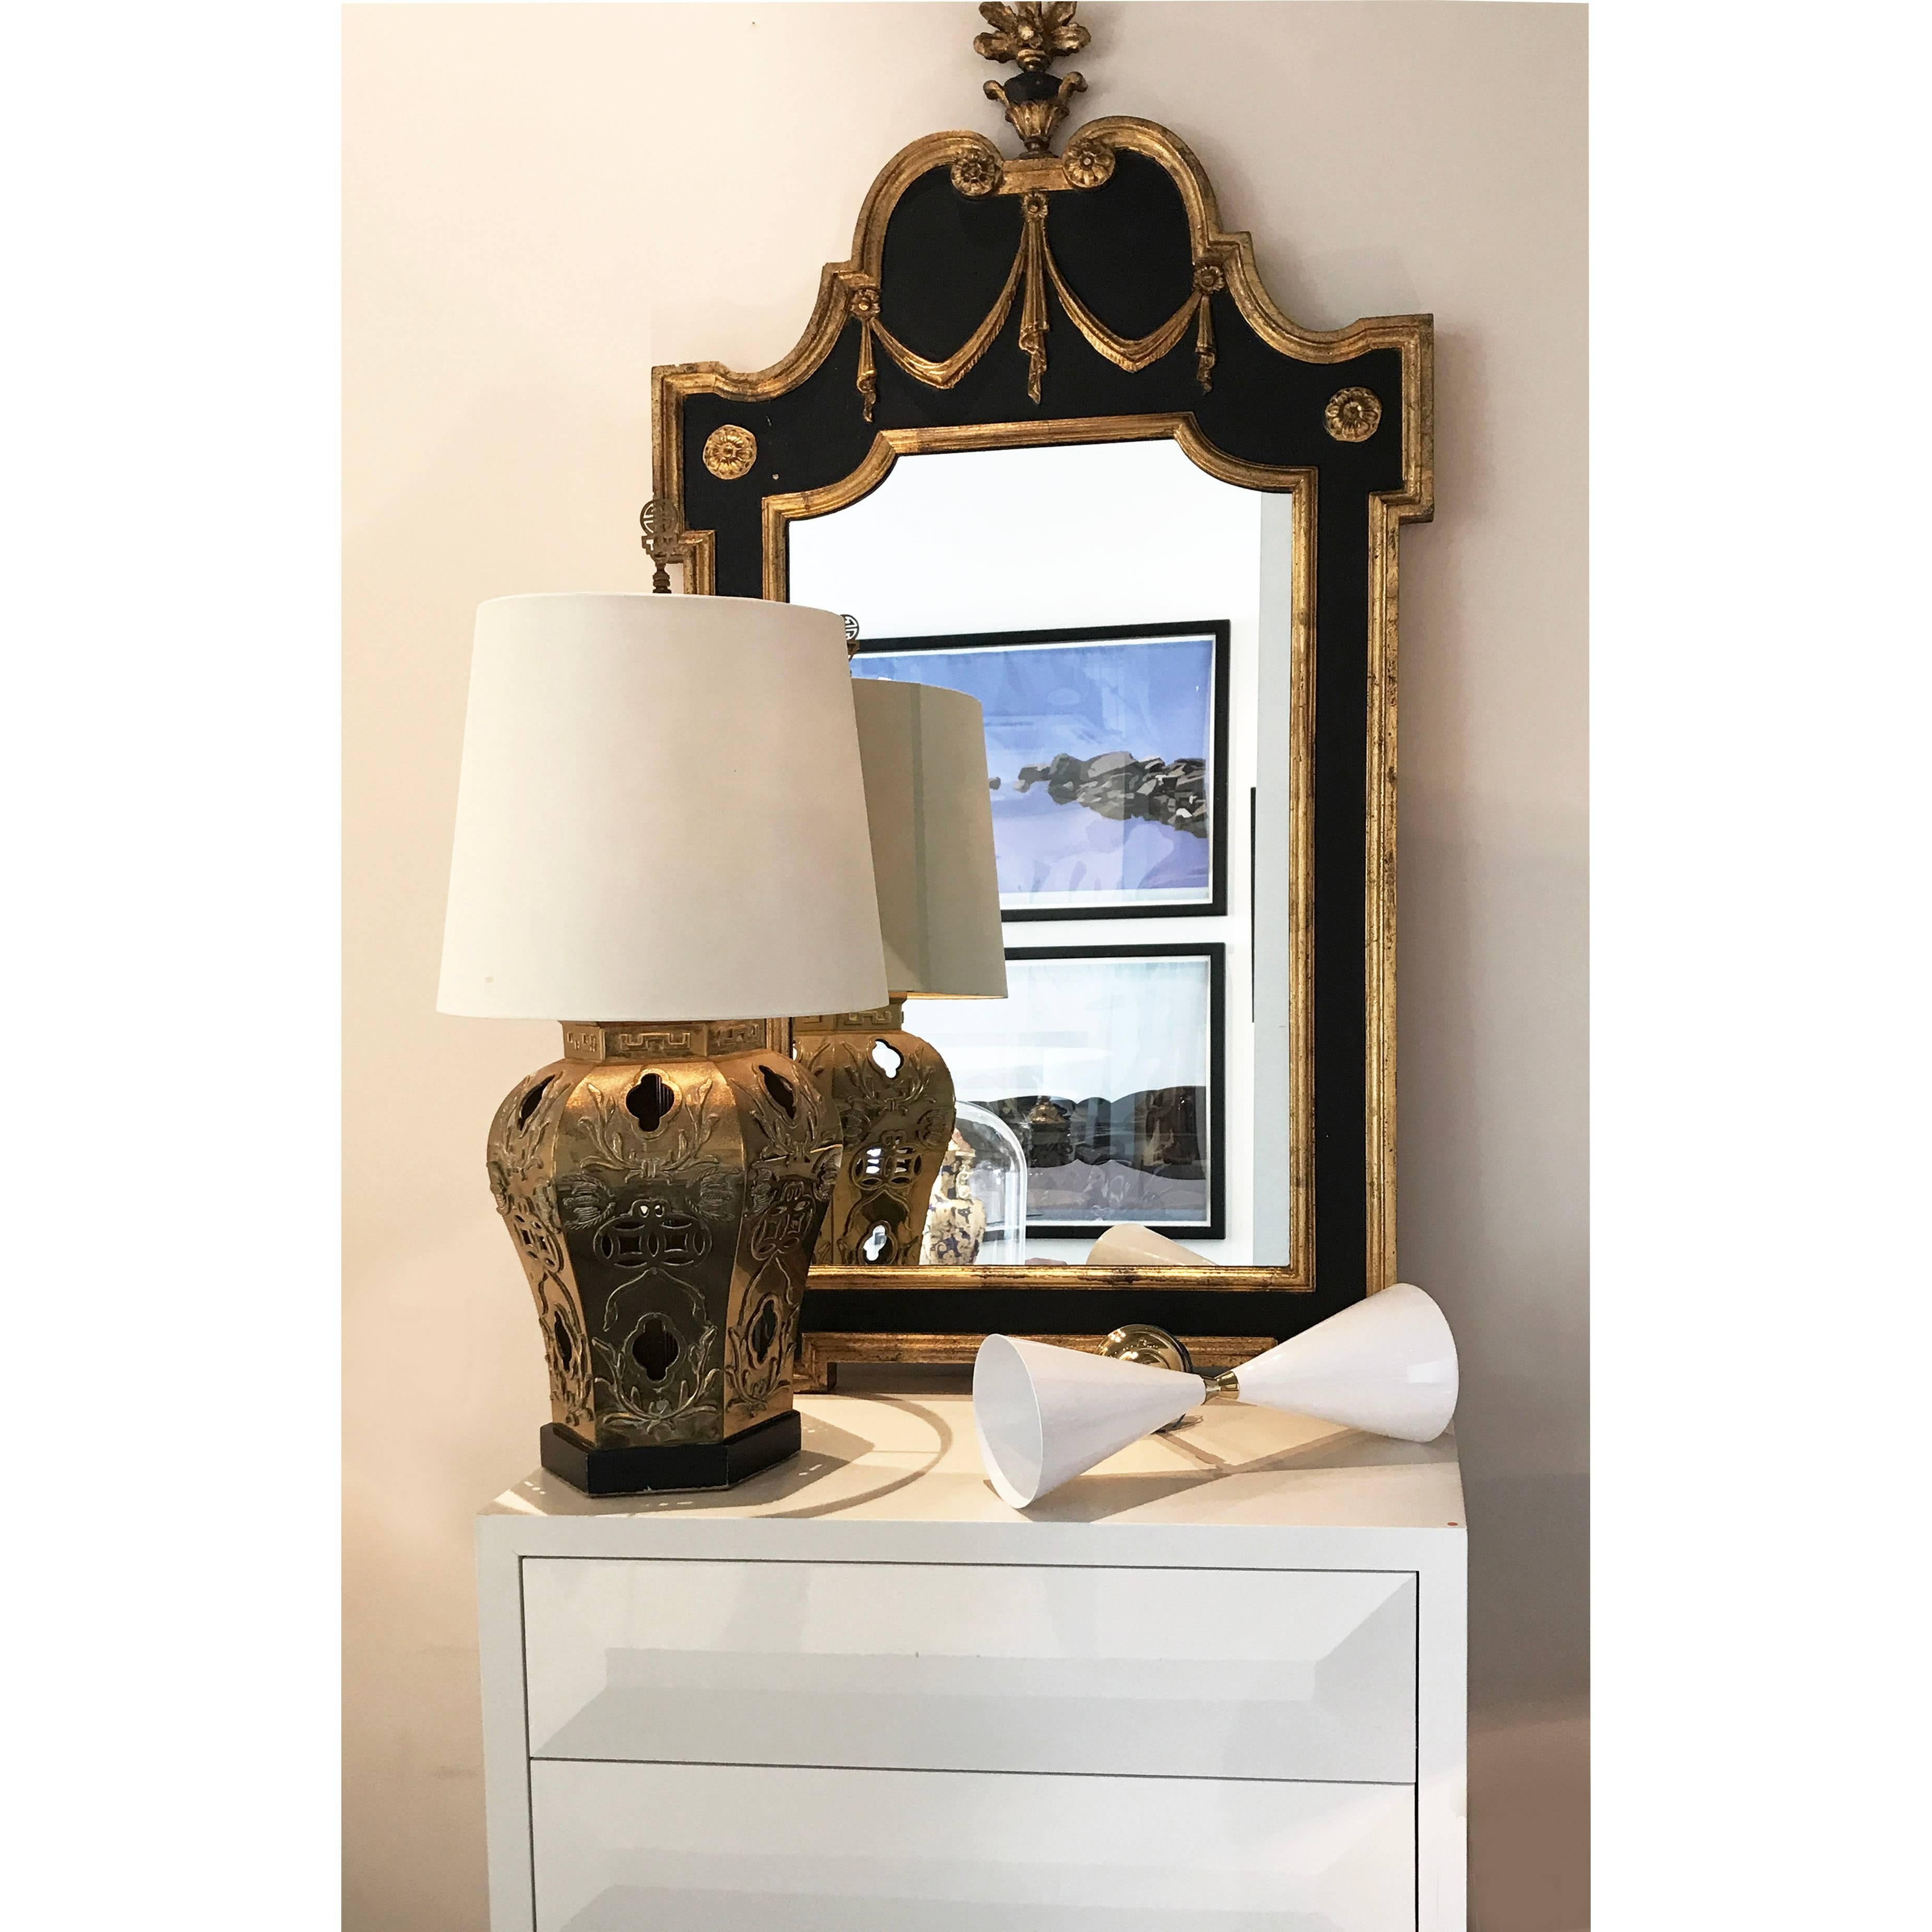 1940s American Hollywood Regency mirror from Miami. Wooden frame with carved gold detailing and original mirror. Mirror can be hung or rest on a surface. 

W70 x H145 x D4 cm

Good vintage condition.